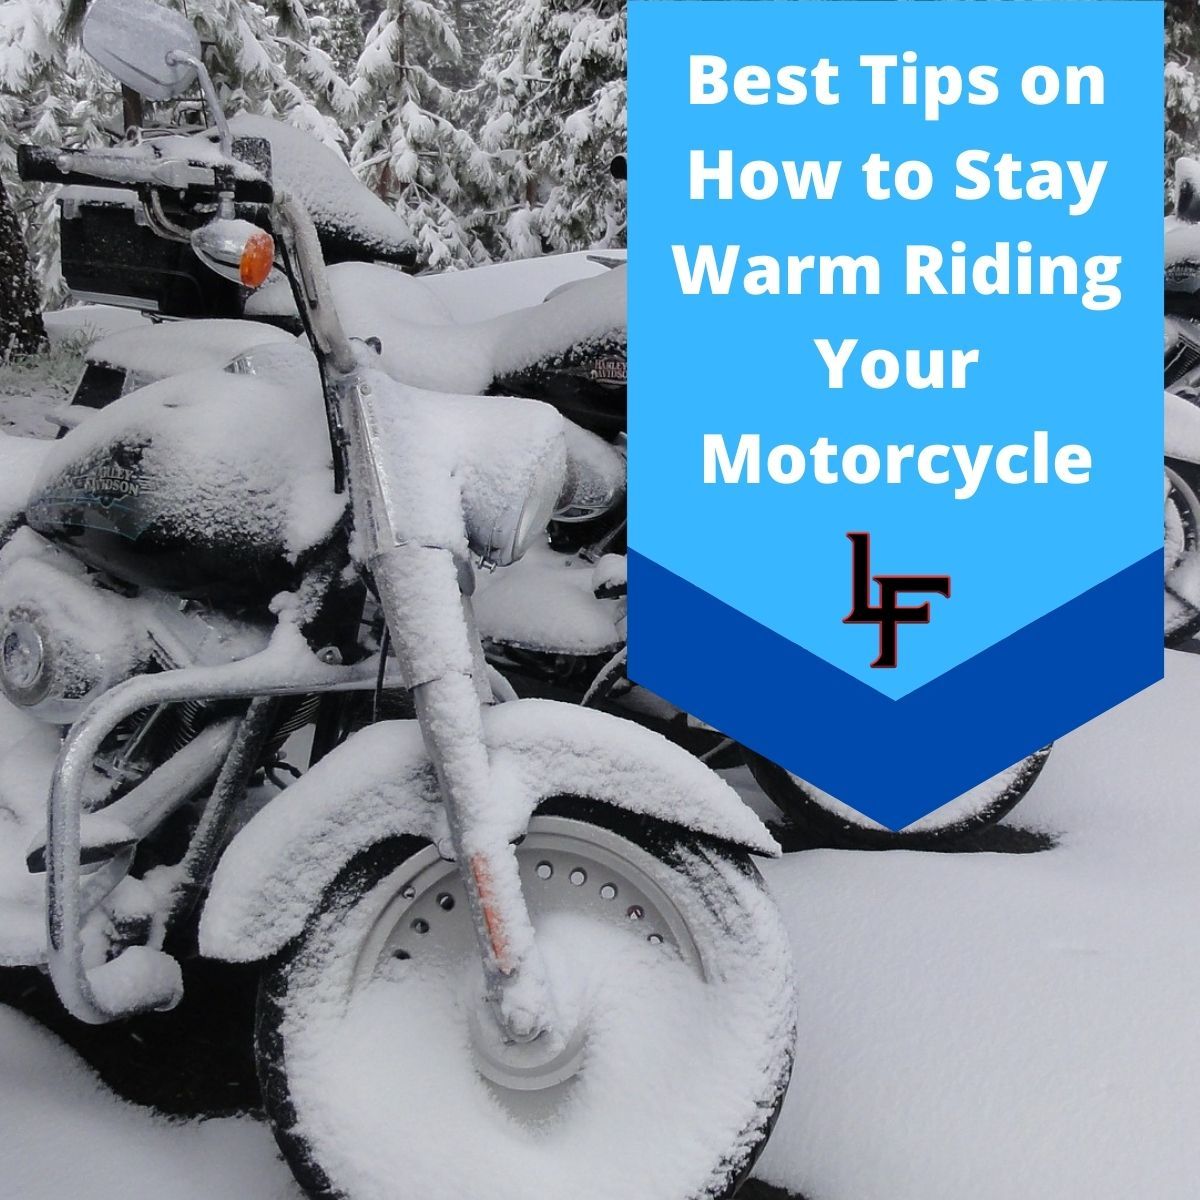 Top 10 tips for keeping your feet warm on the bike